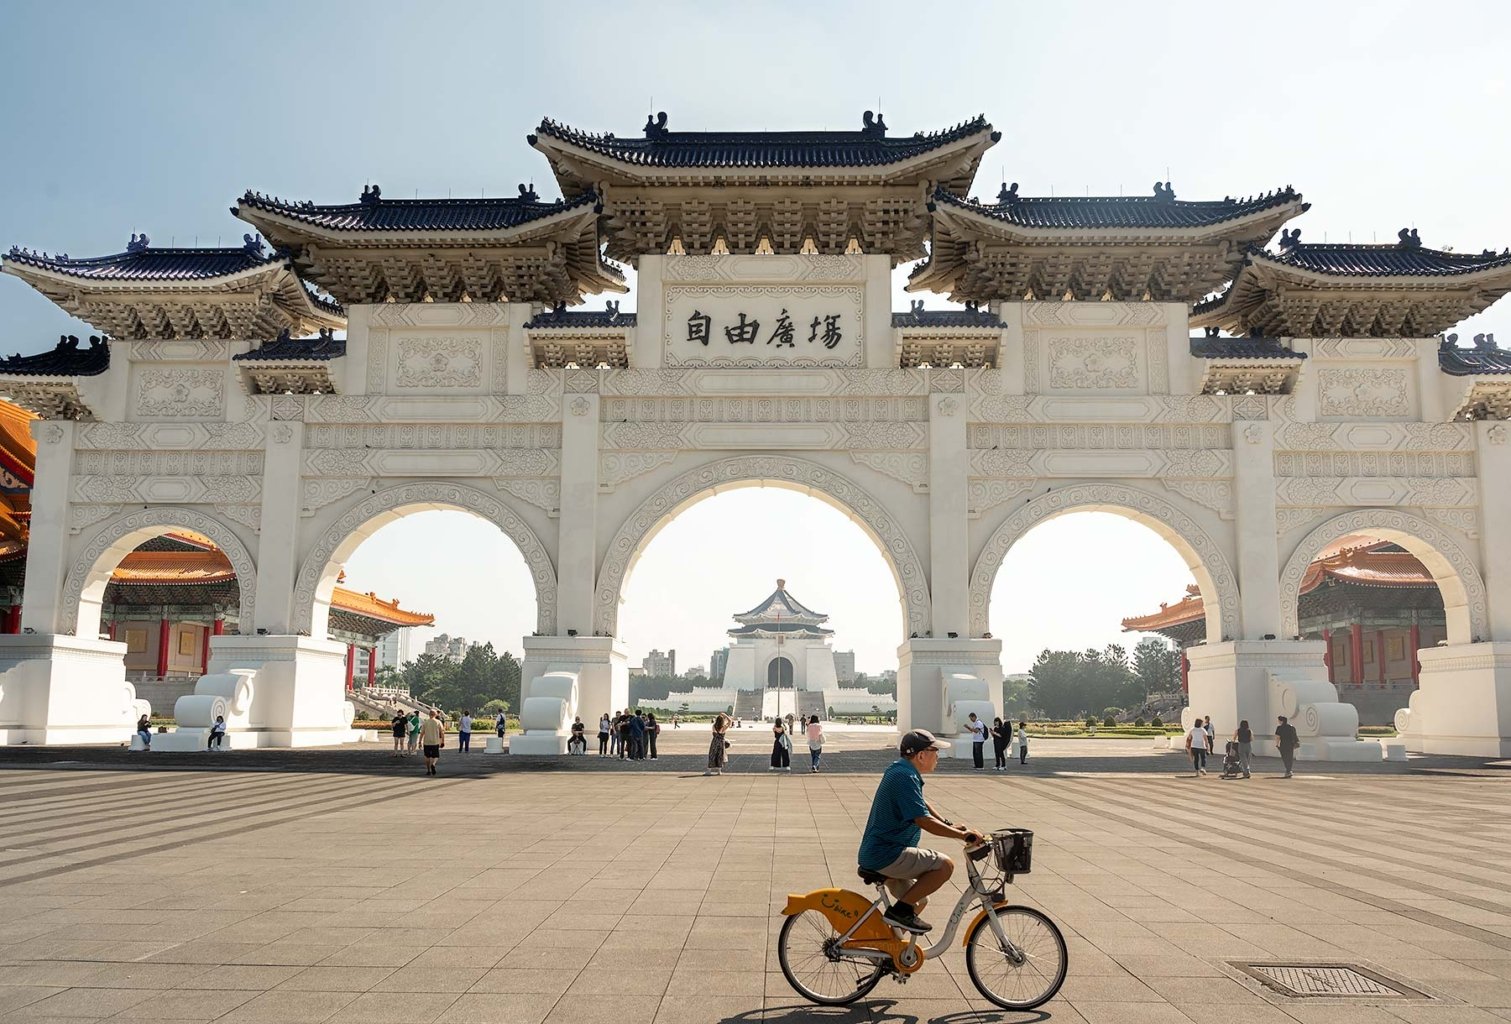 Front gate at the Chiang Kai shek memorial hall in Taipei. Must see on your Taiwan itinerary